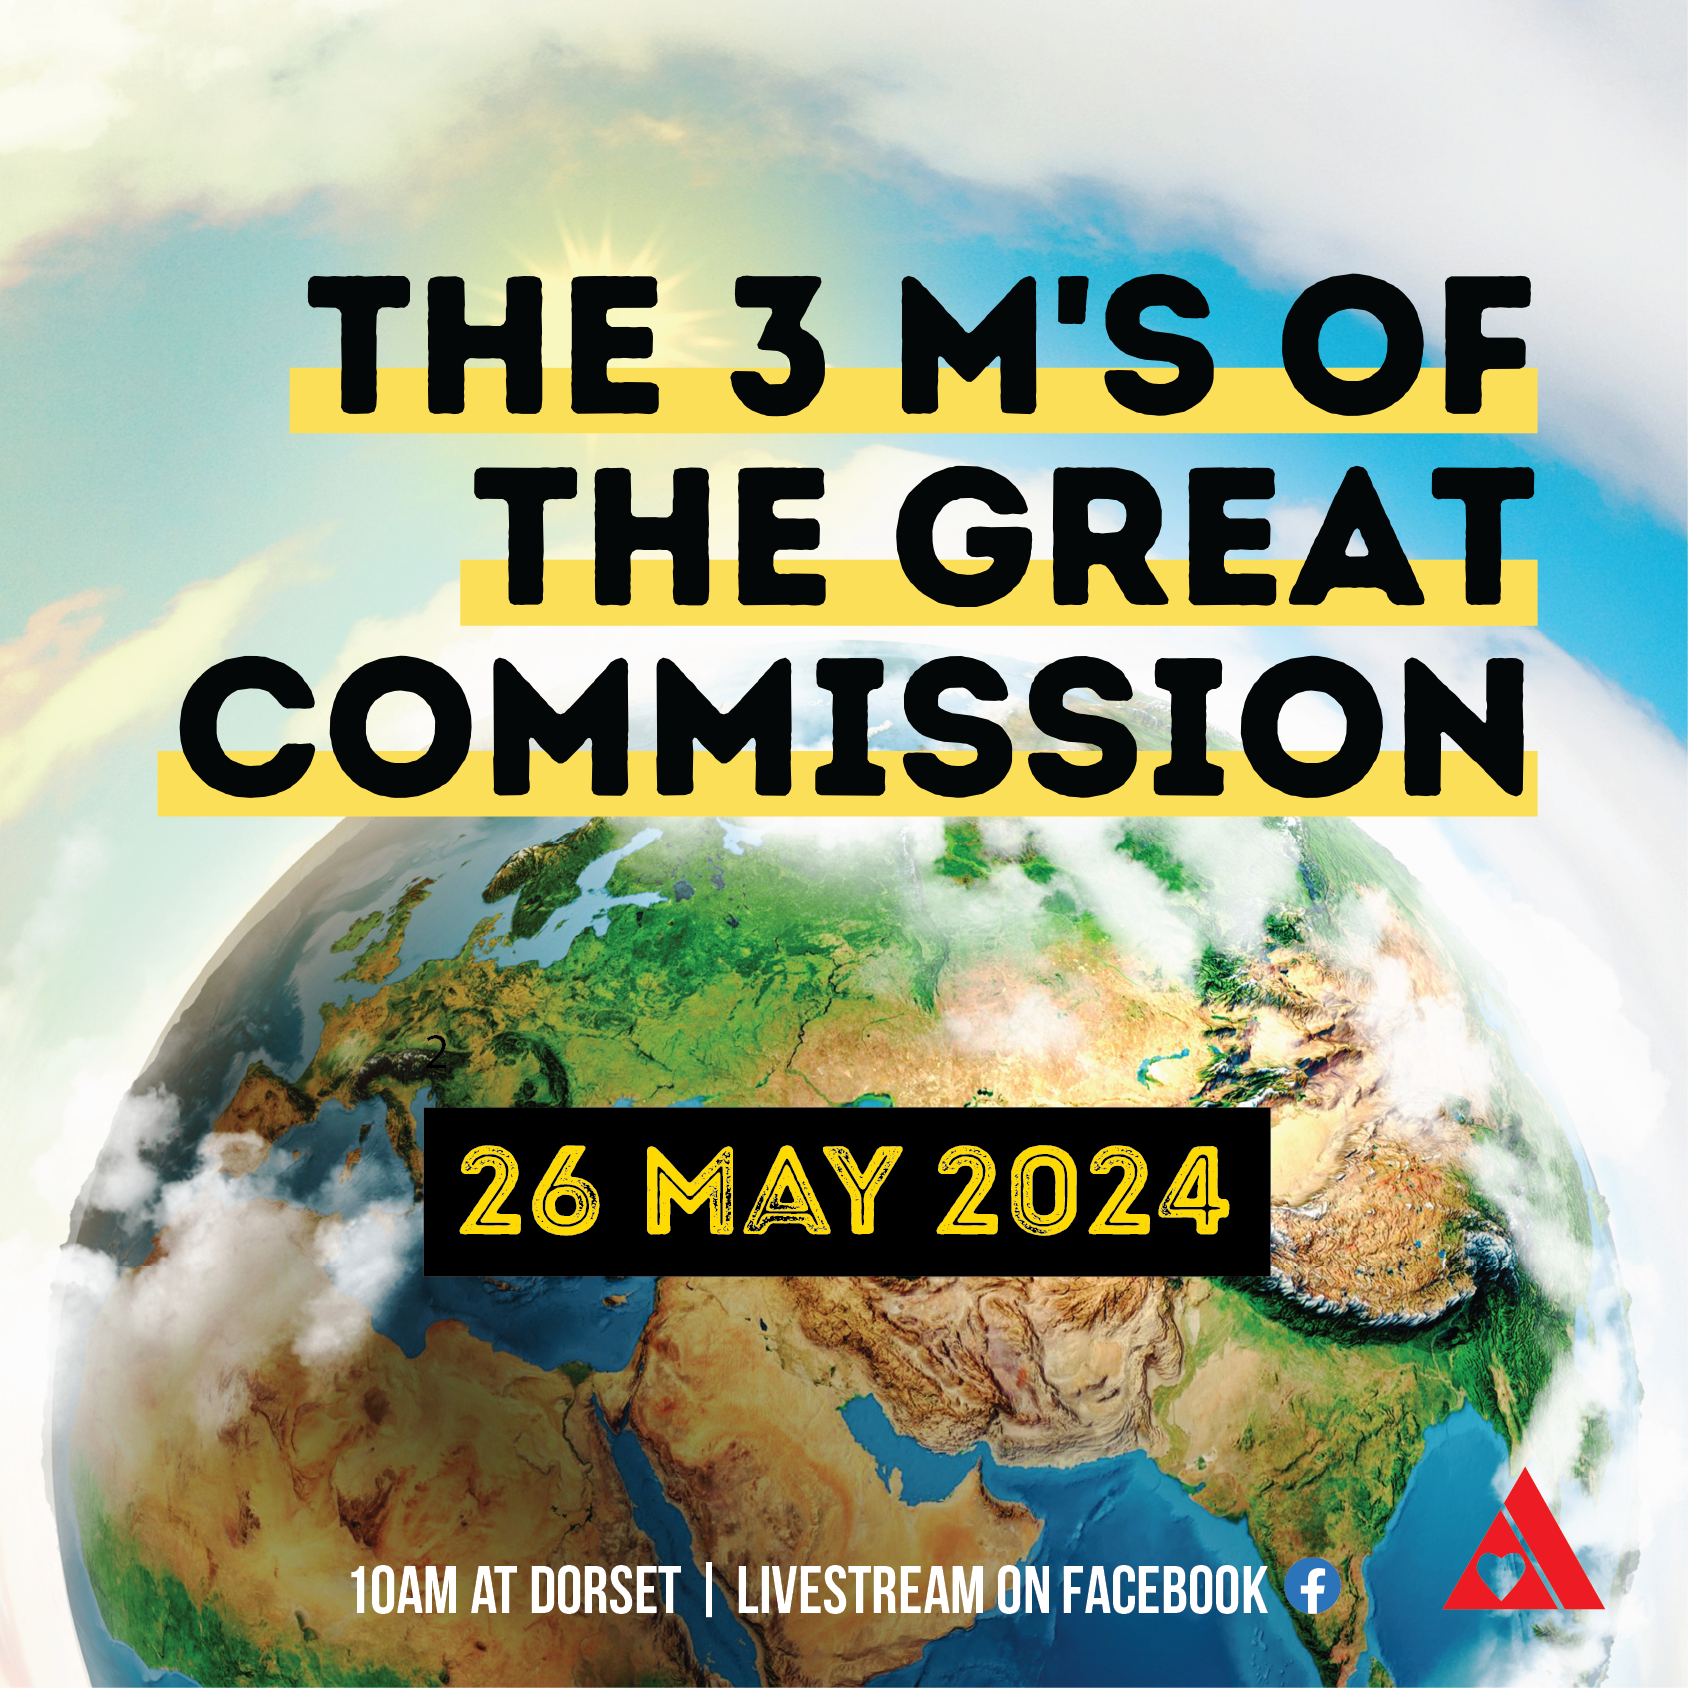 The 3 M’s of Great Commission